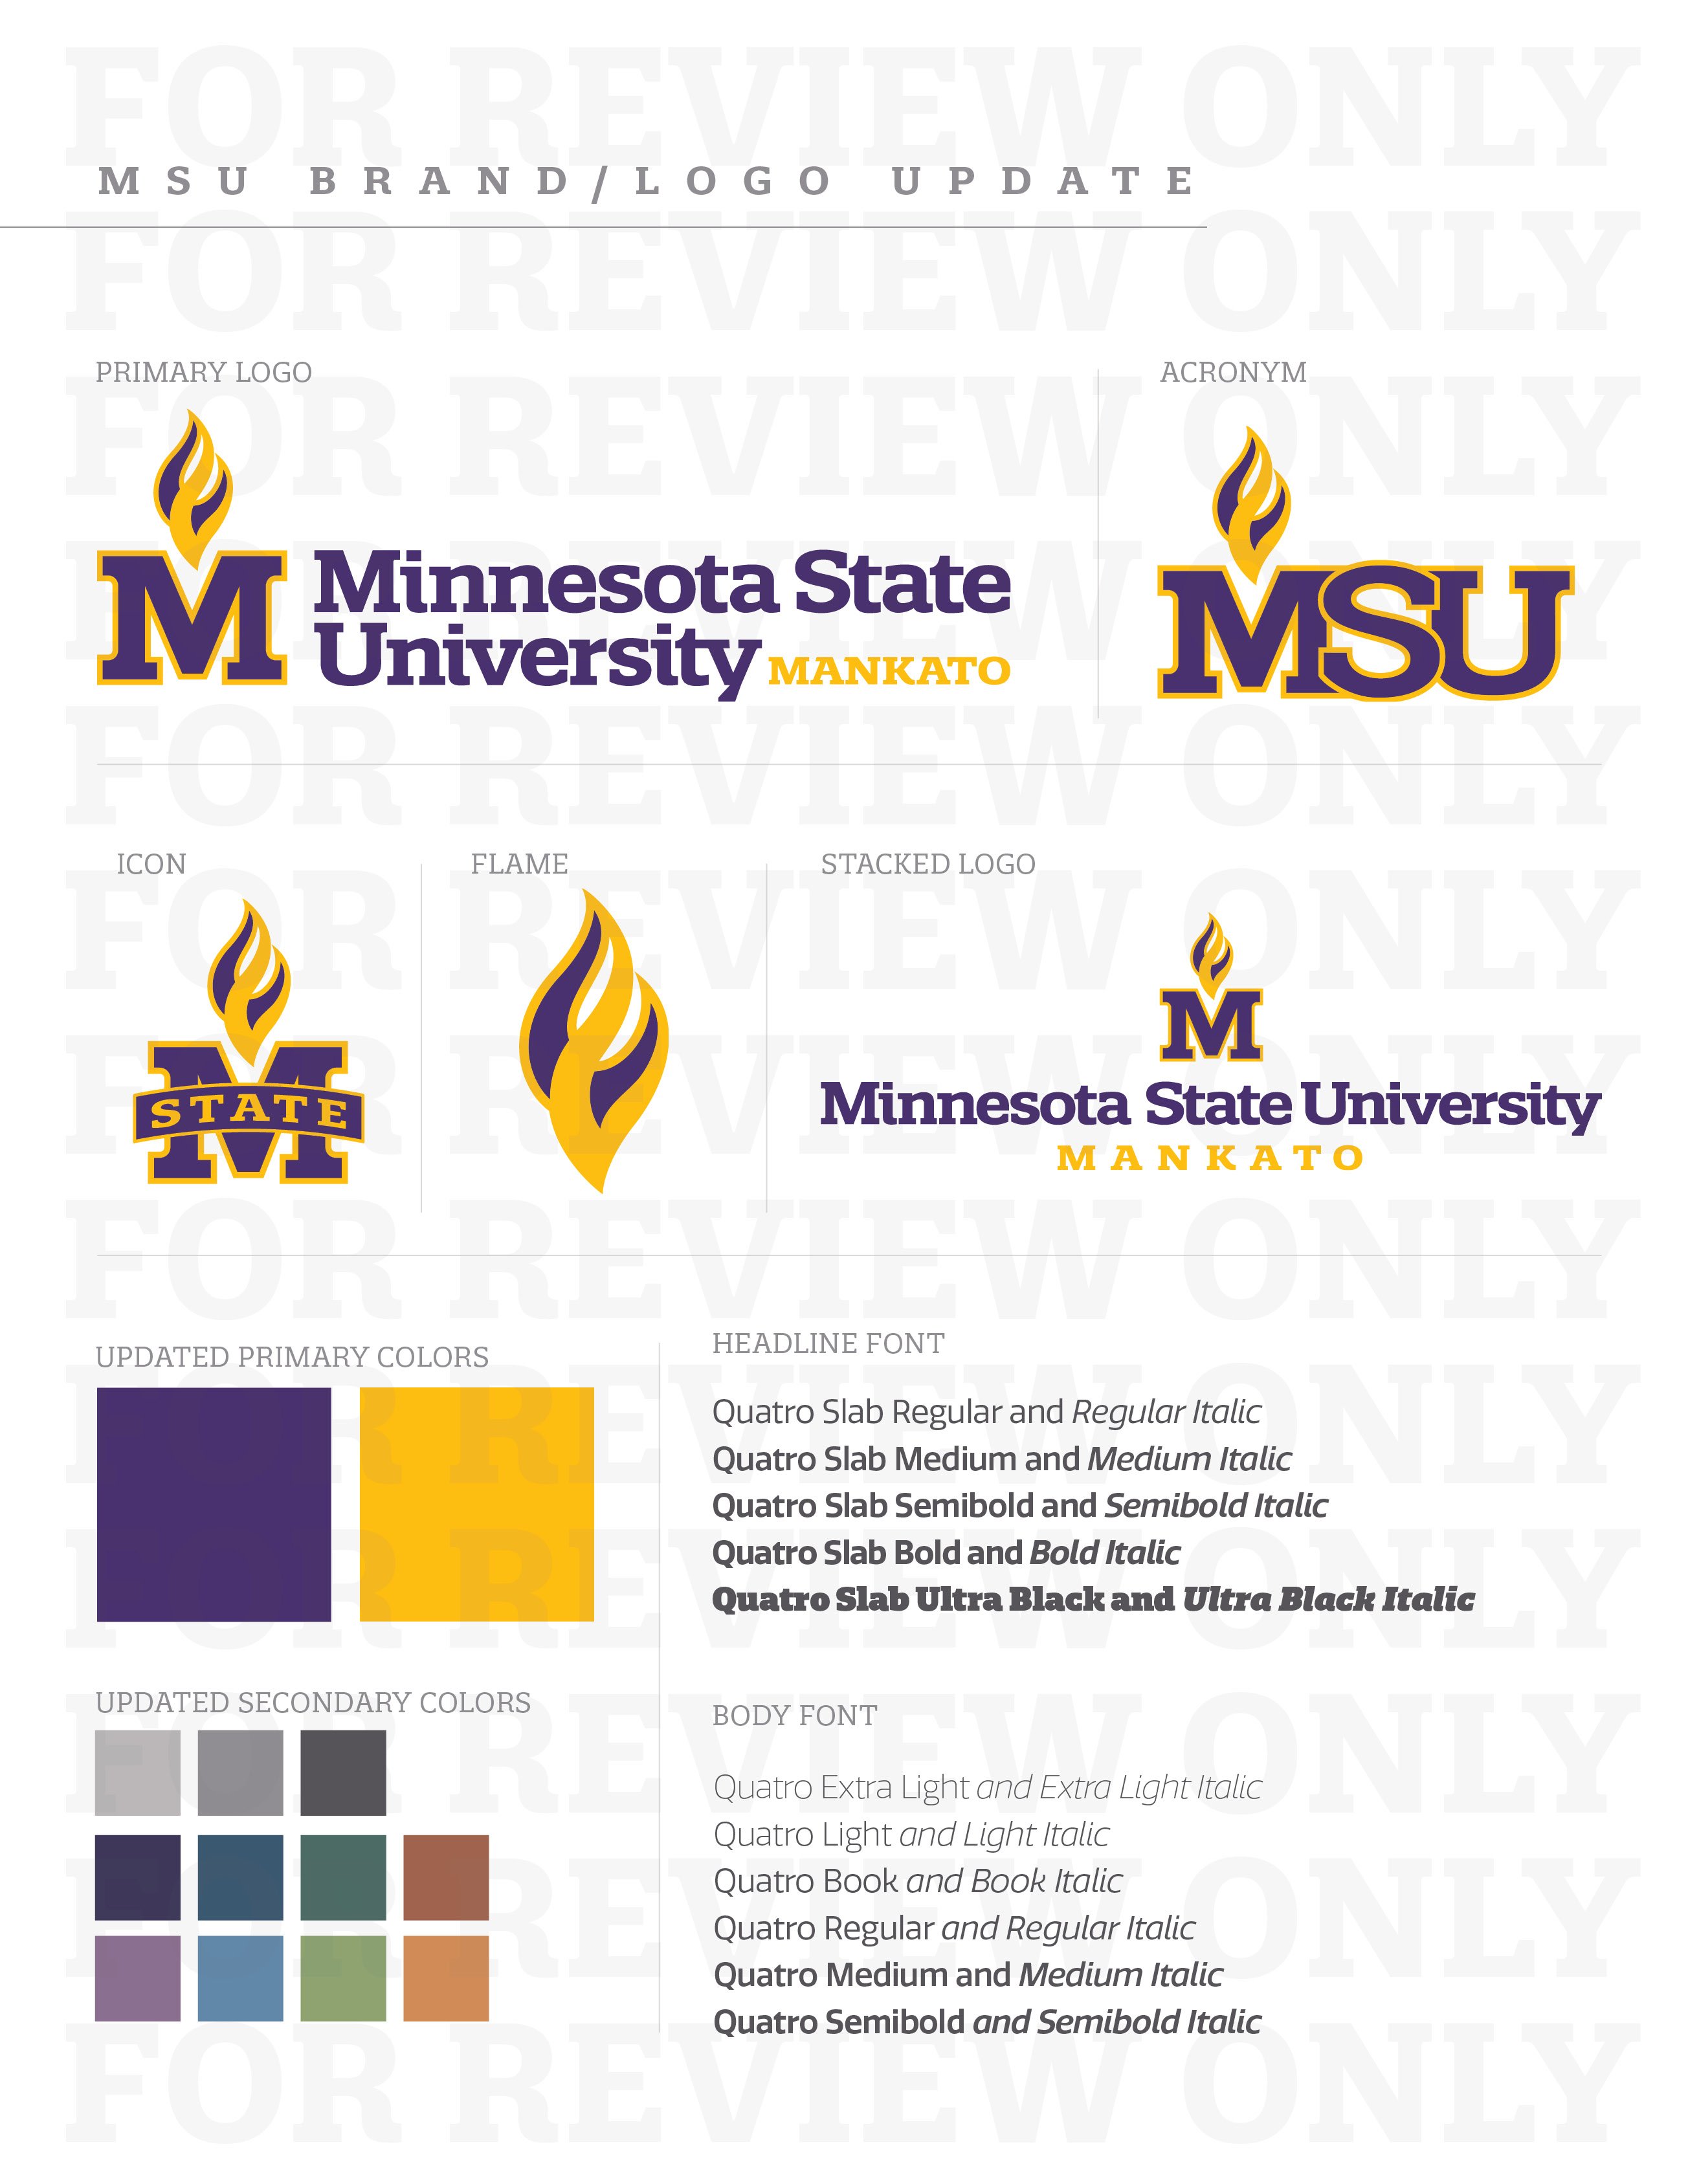 Image of MSU Brand and logo update colors font and logo